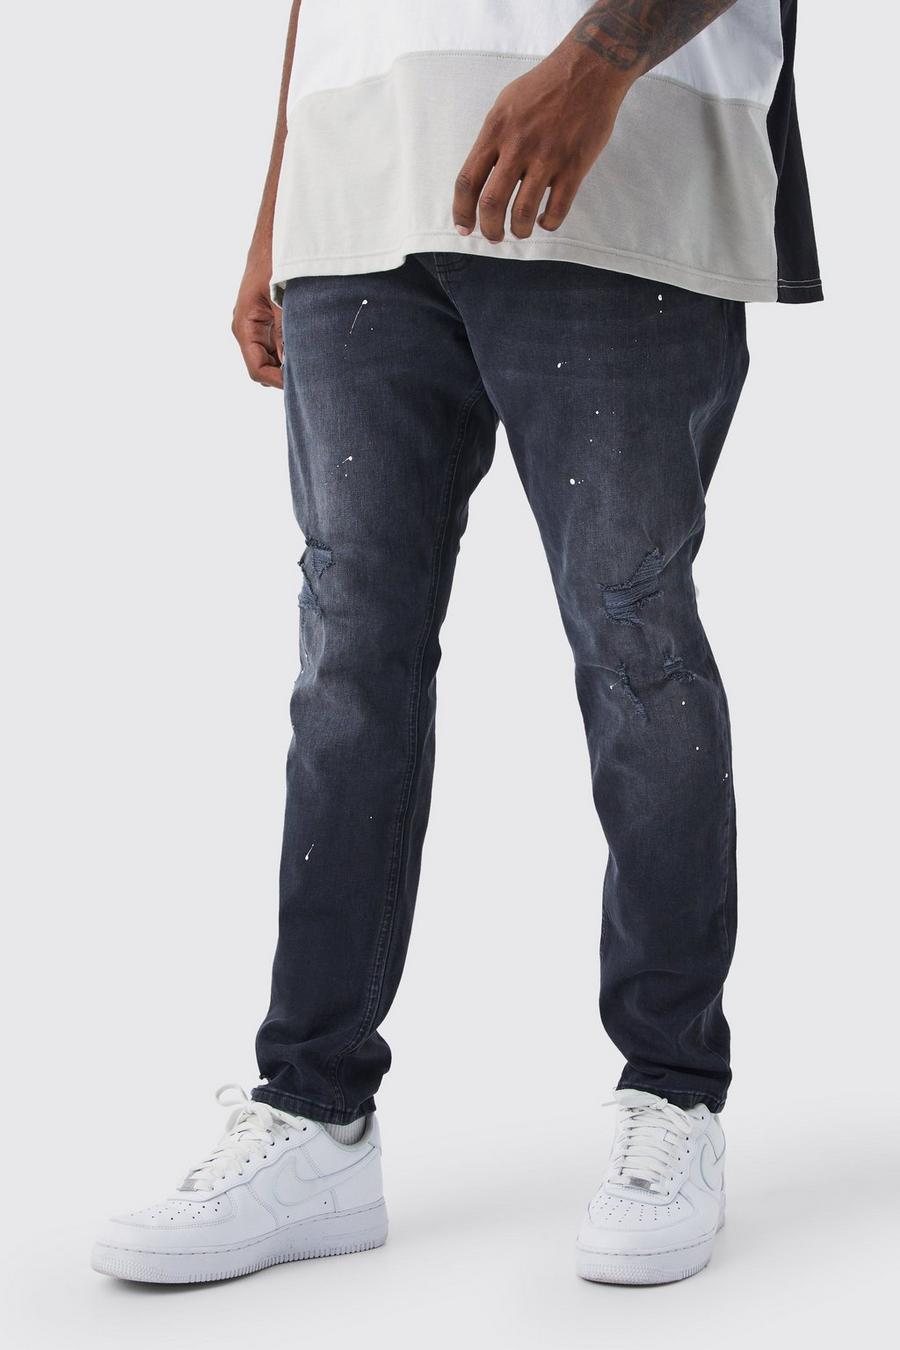 Washed black Plus Skinny Stretch Ripped Knee Paint Splatter Jean